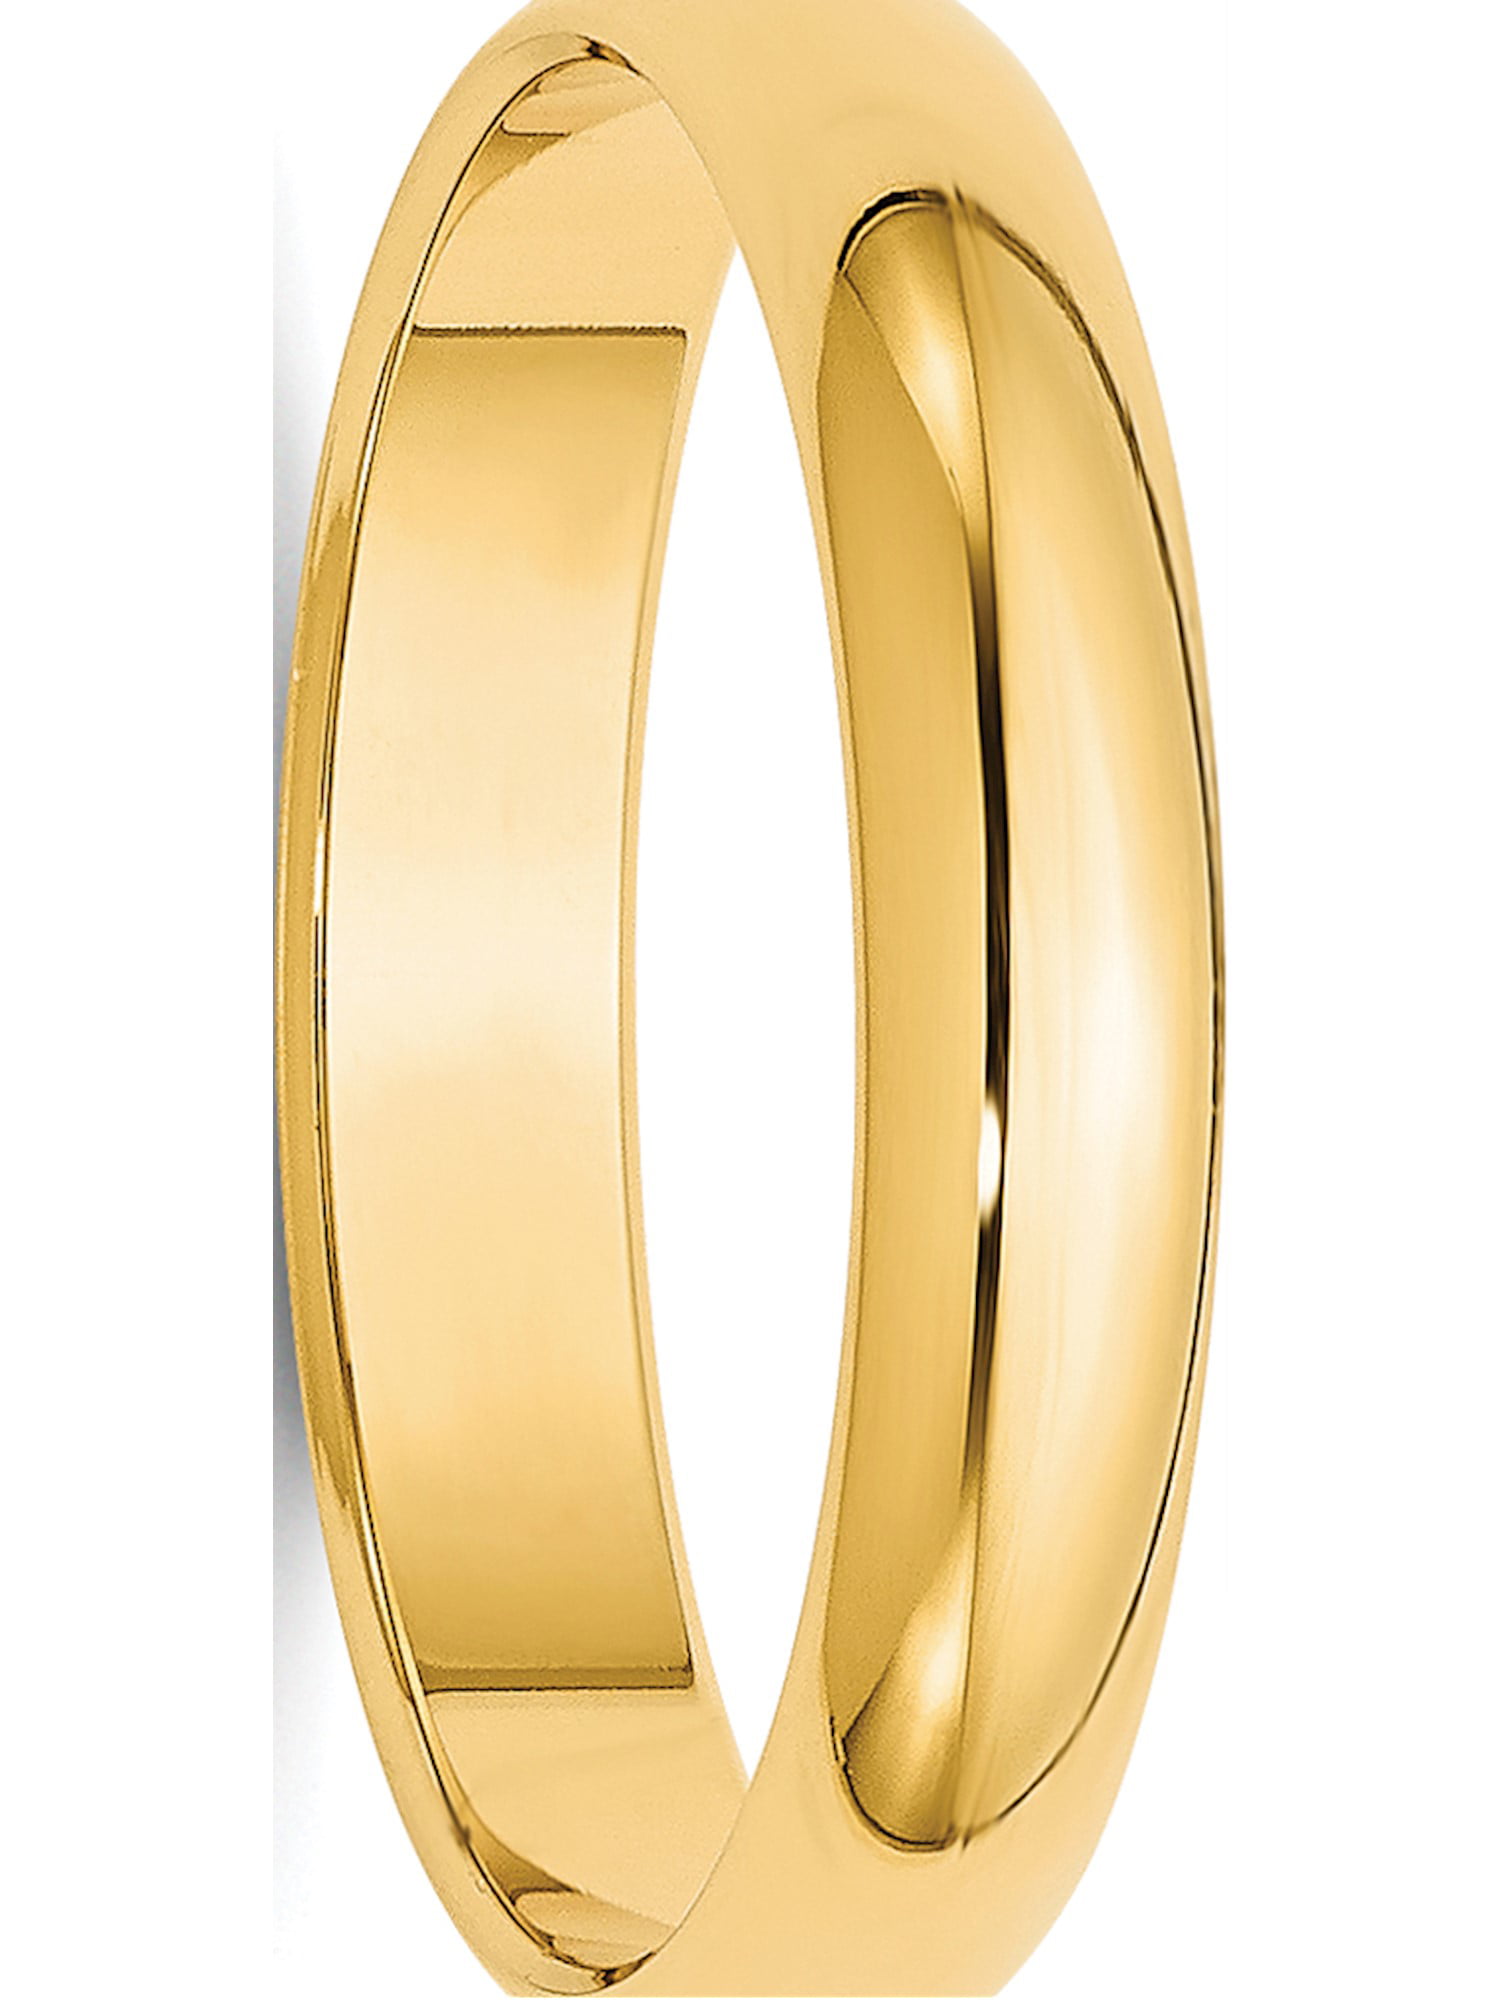 4mm Wide 14k Gold Plated Classic Comfort Fit Wedding Ring Band Size 4-13